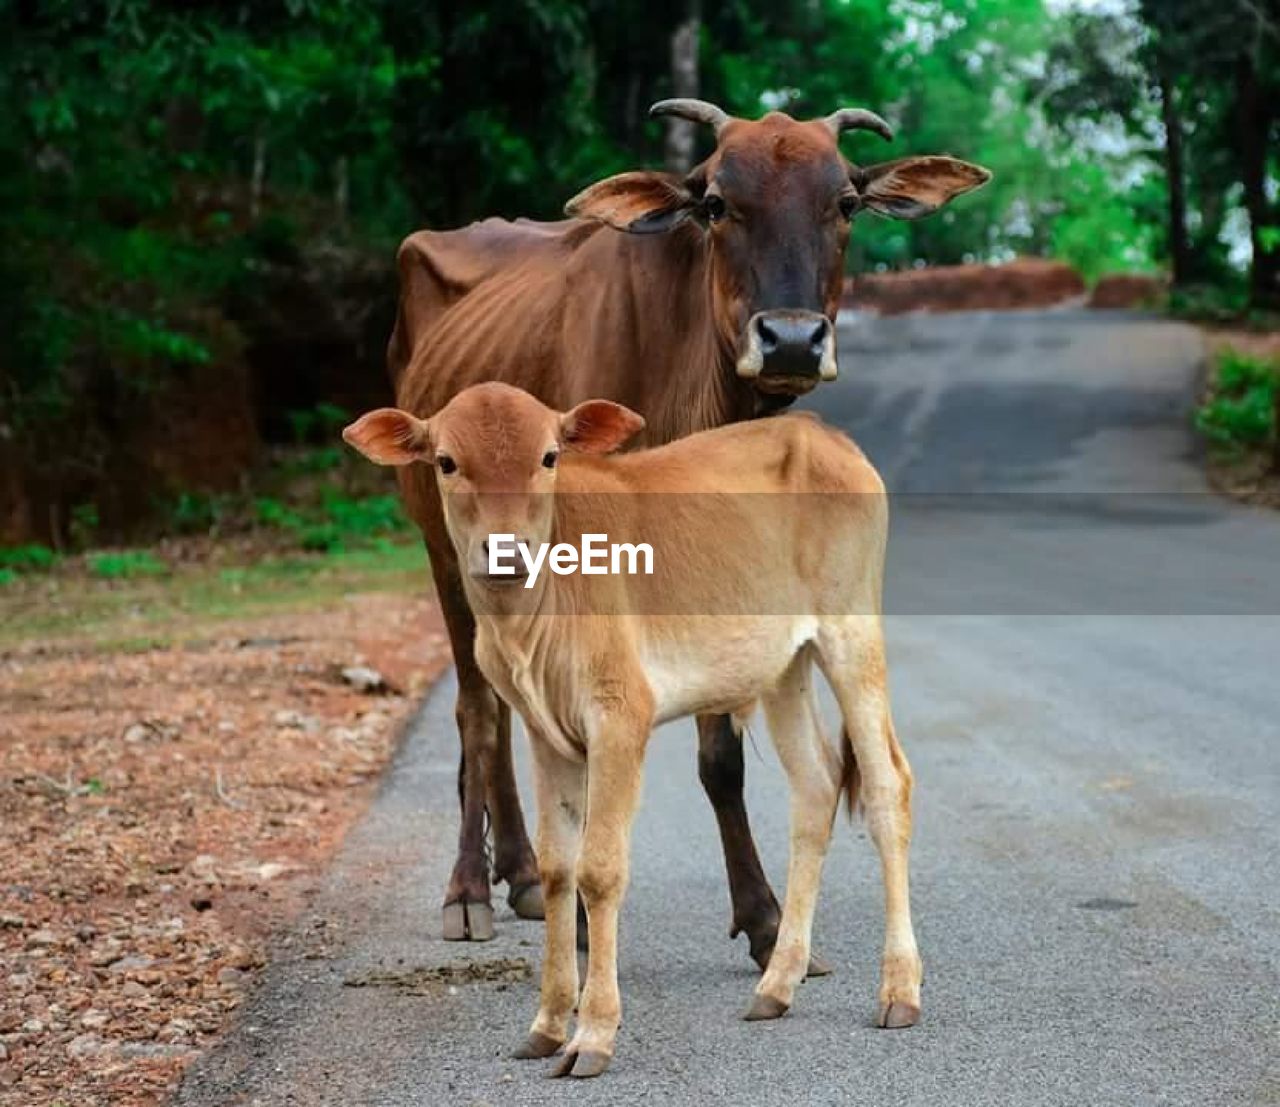 A bond between cow and calf is priceless. stop abusing animals.